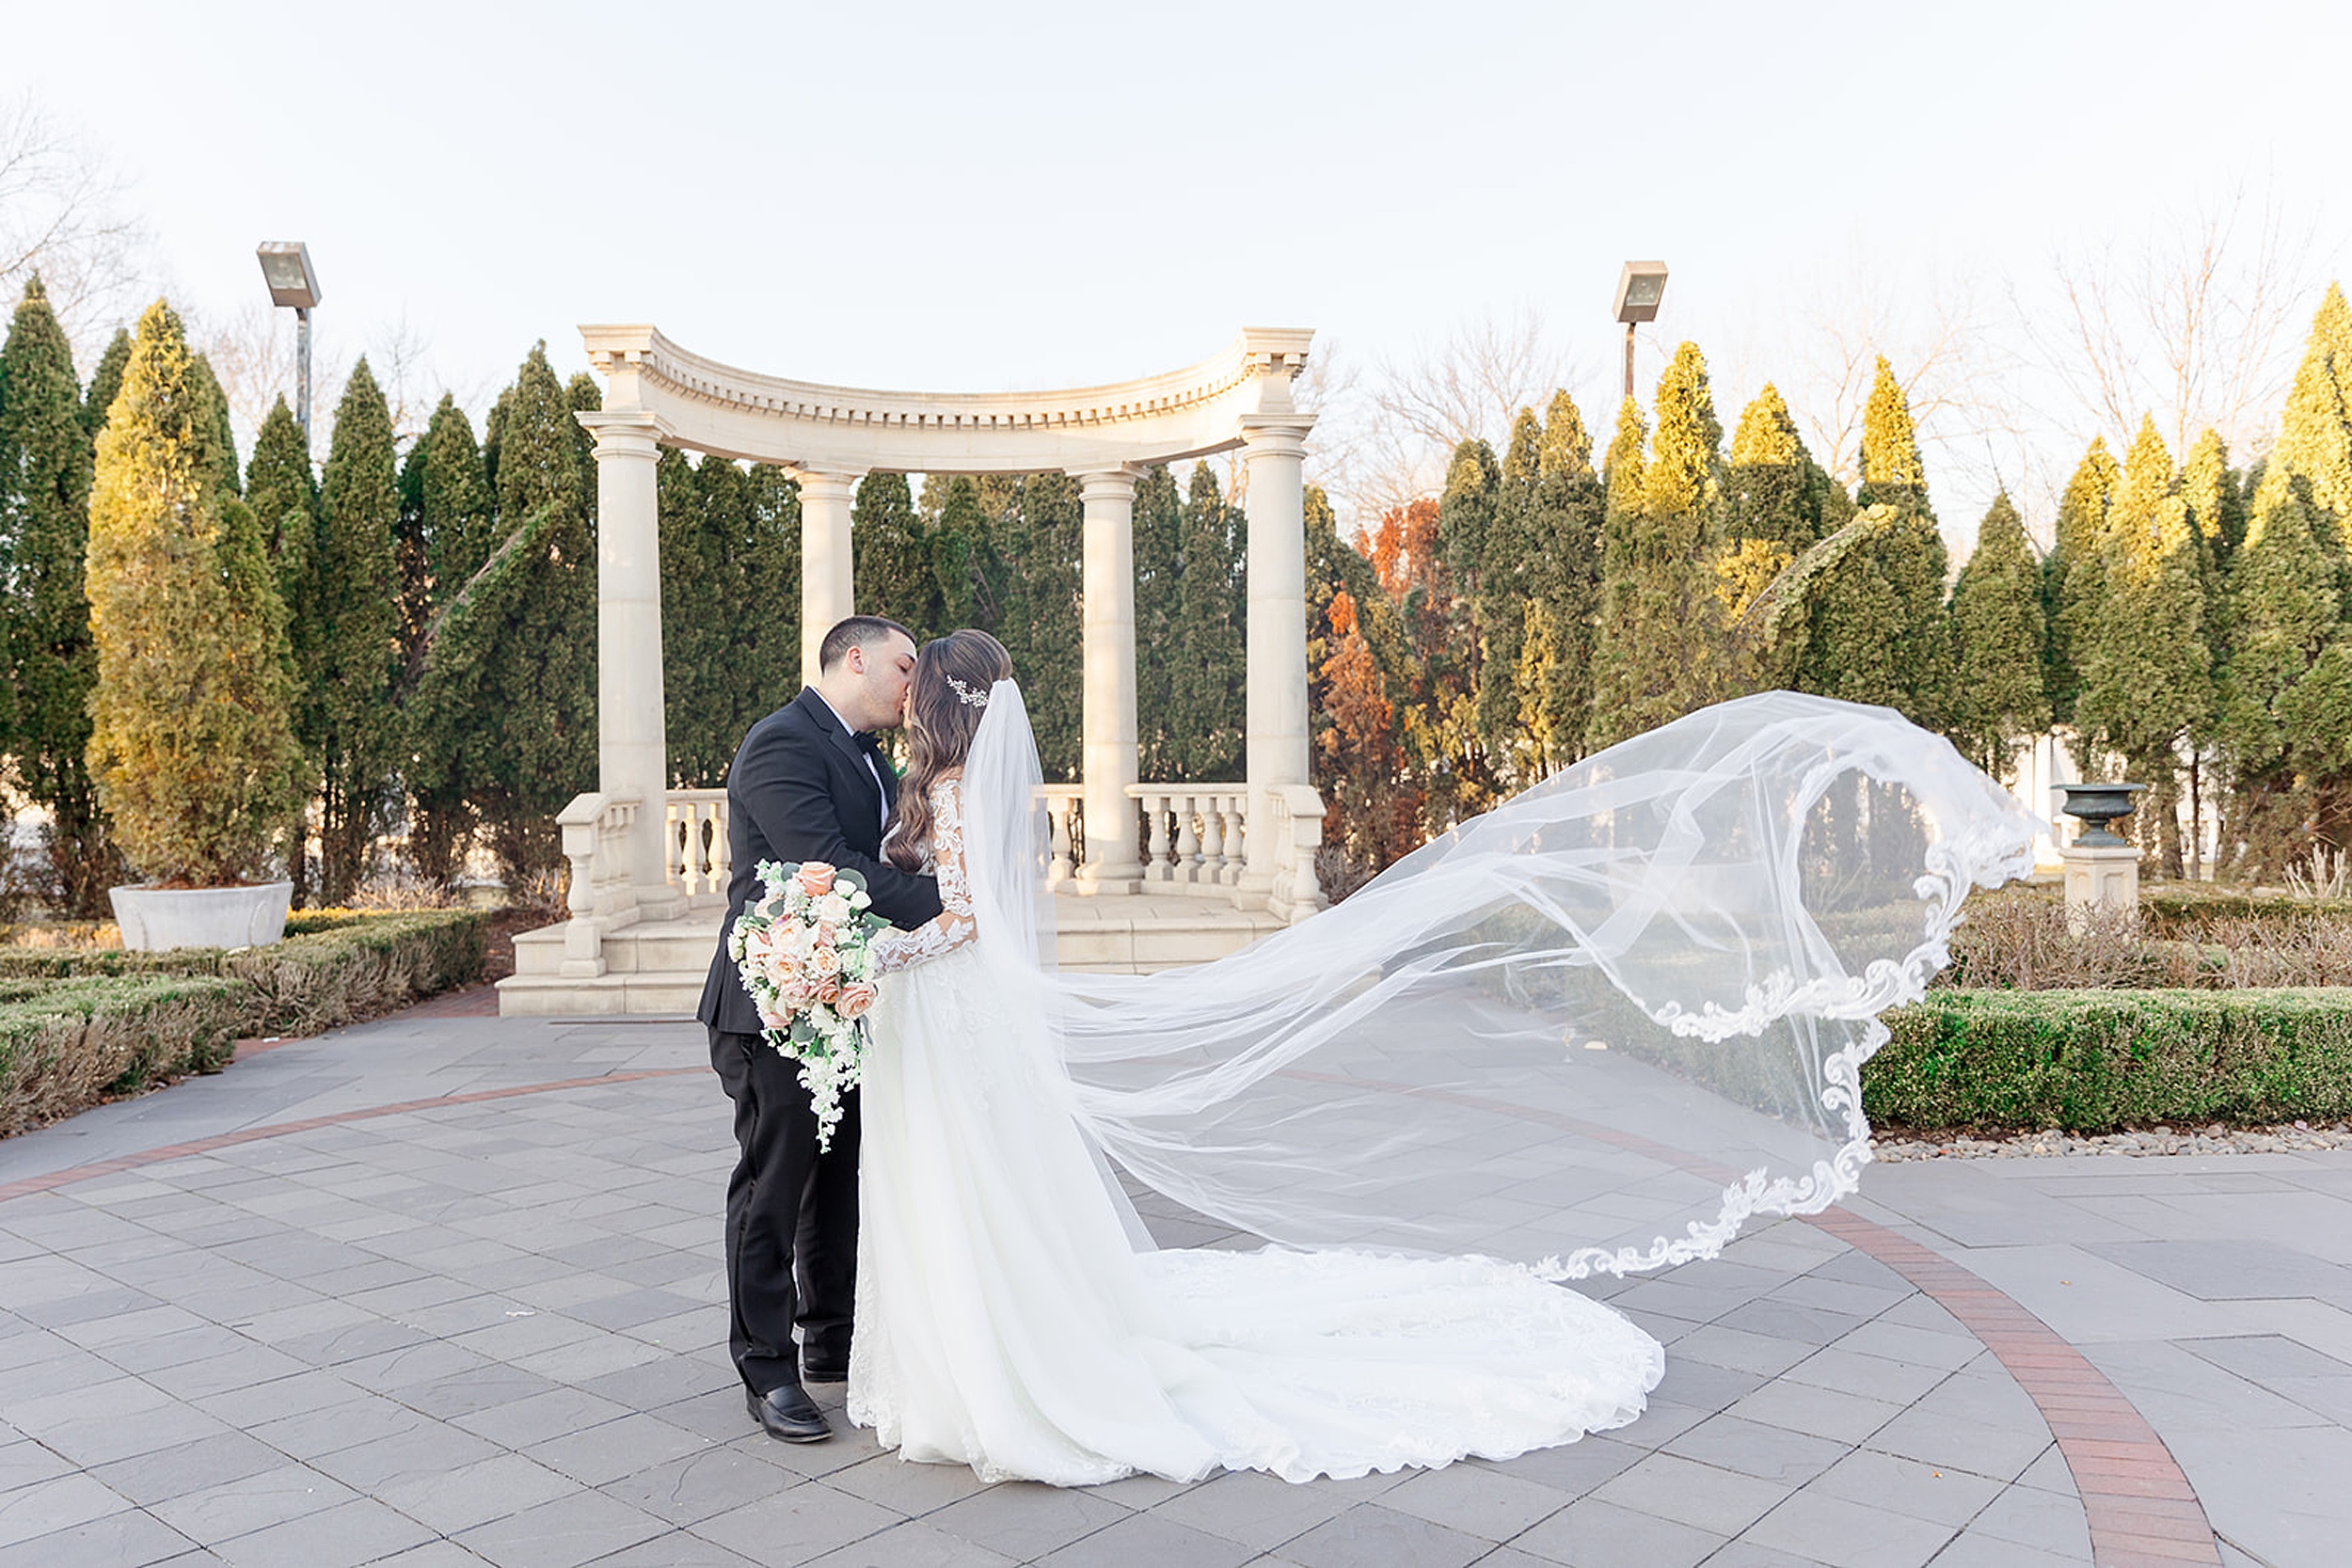 Newlyweds kiss in a garden patio while the veil flies in the wind at the rockleigh wedding venue